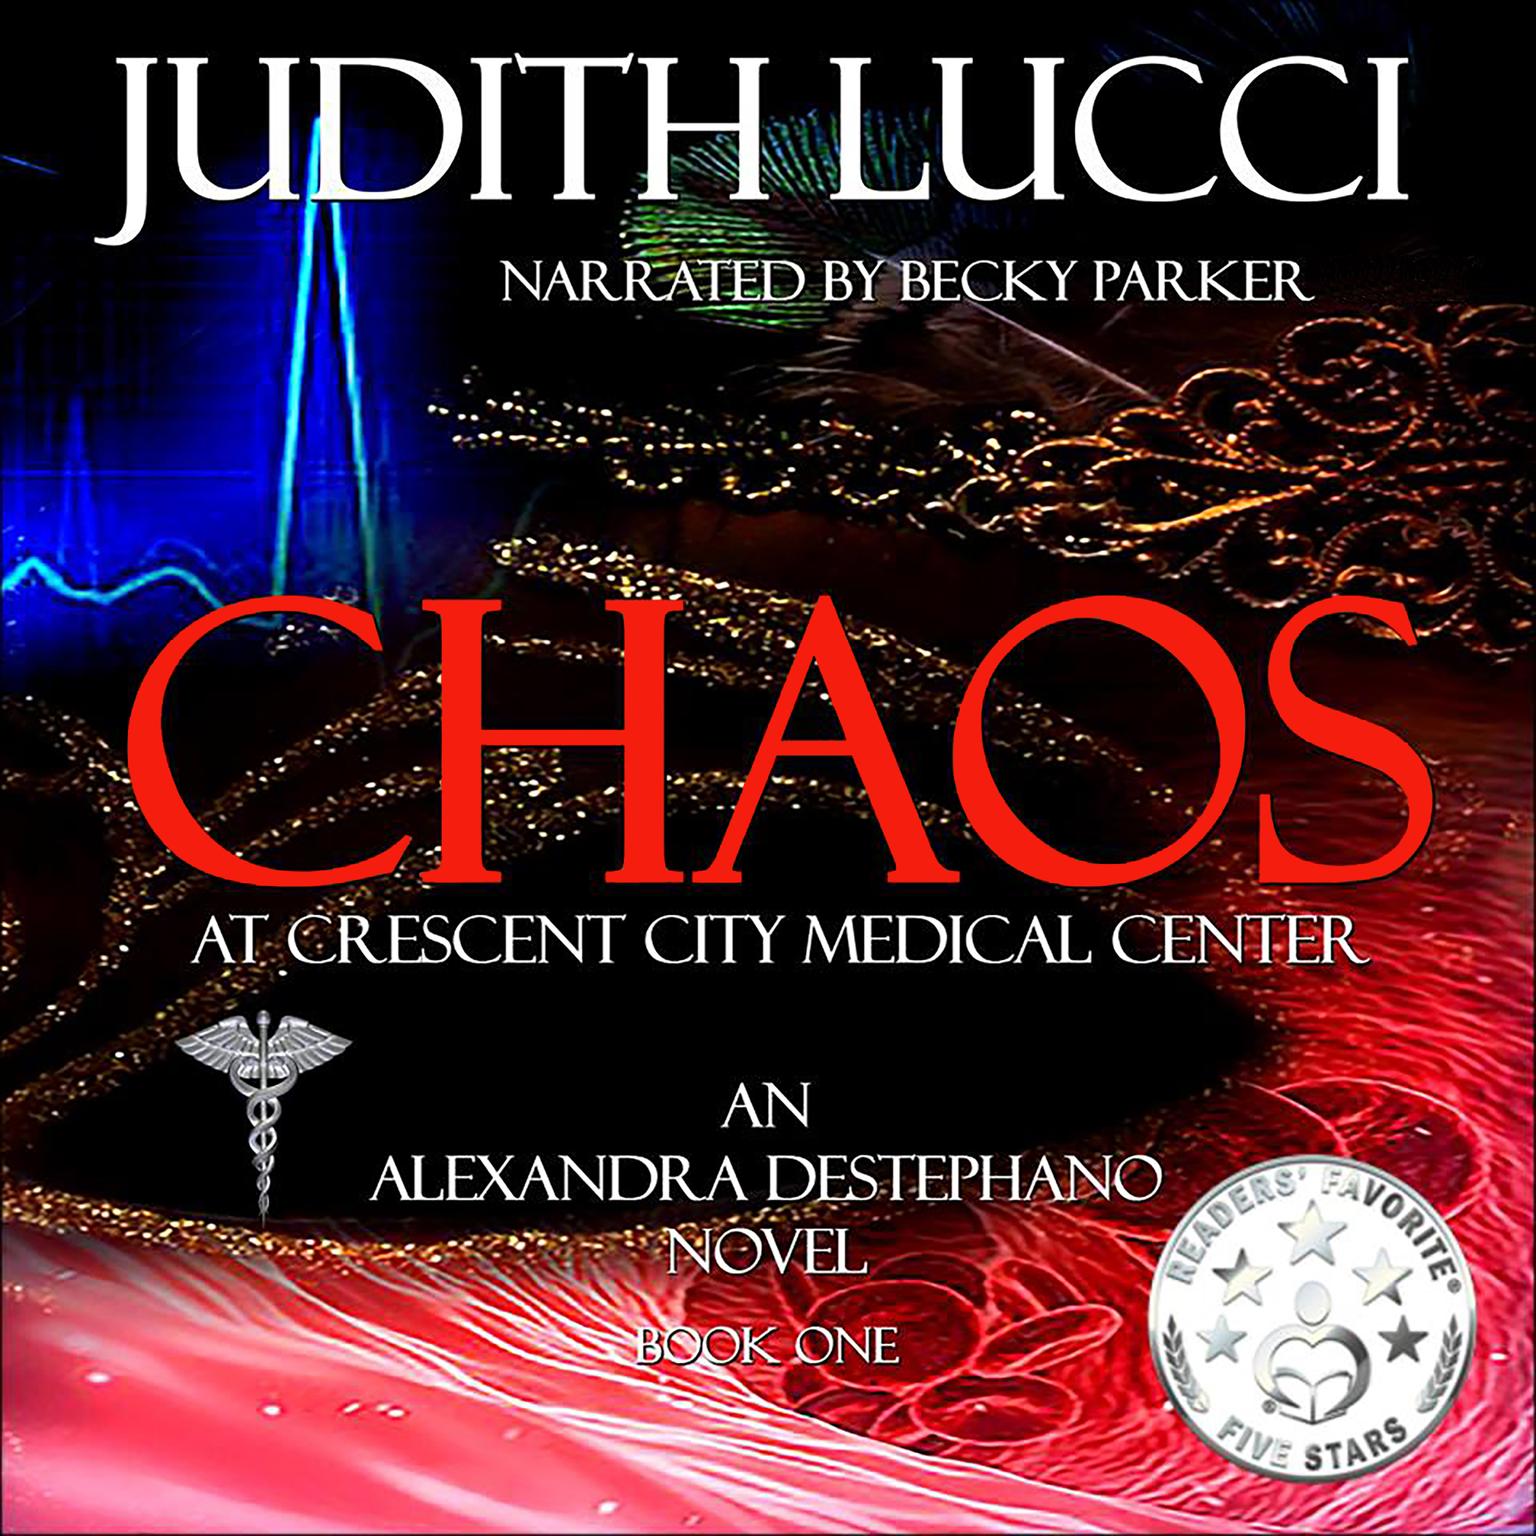 Chaos at Crescent City Medical Center Audiobook, by Judith Lucci